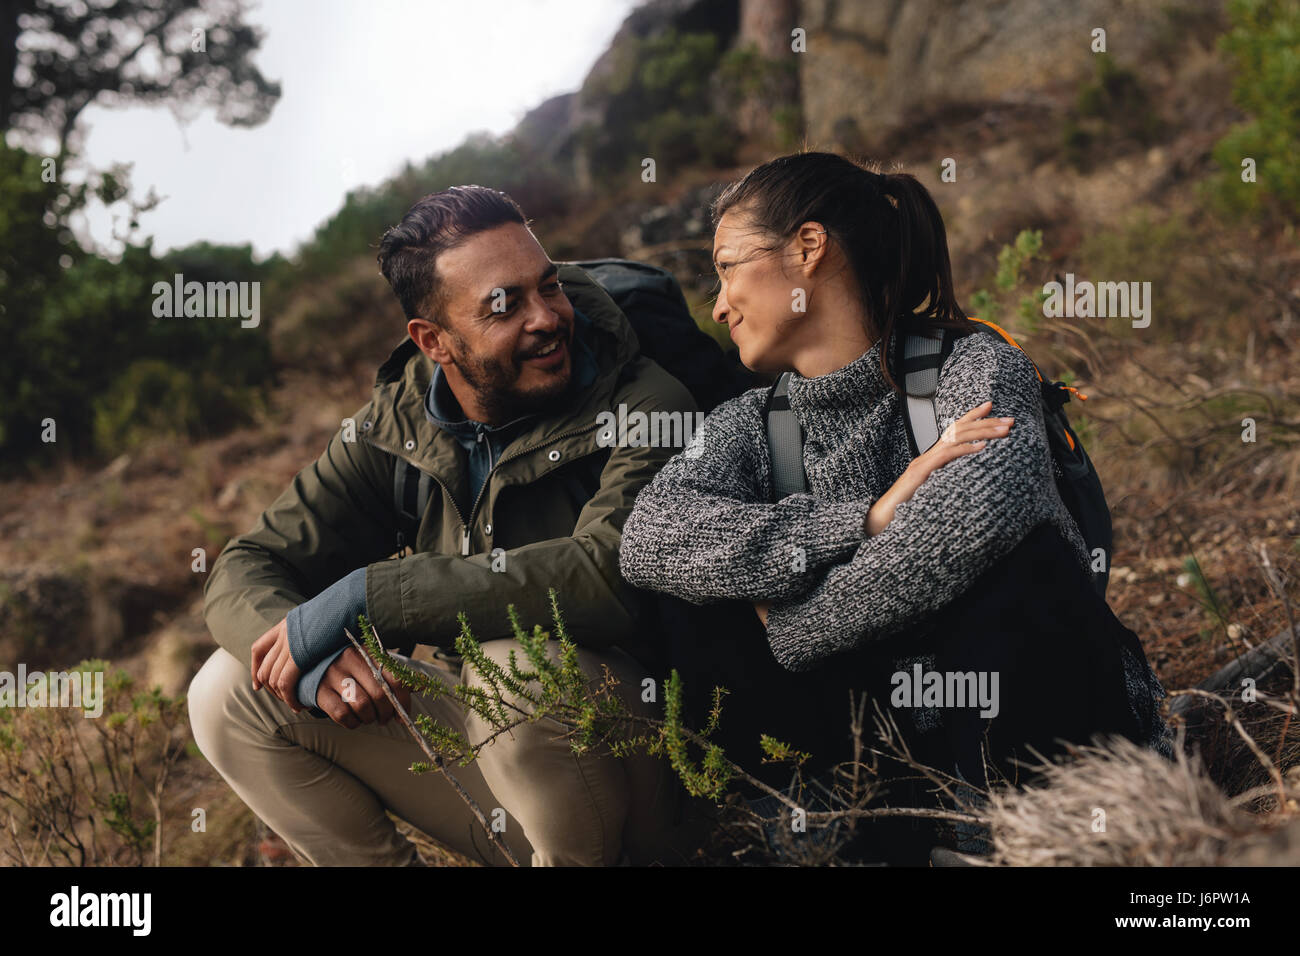 Young couple taking a break on a hike. Man and woman sitting and taking rest during hiking. Stock Photo